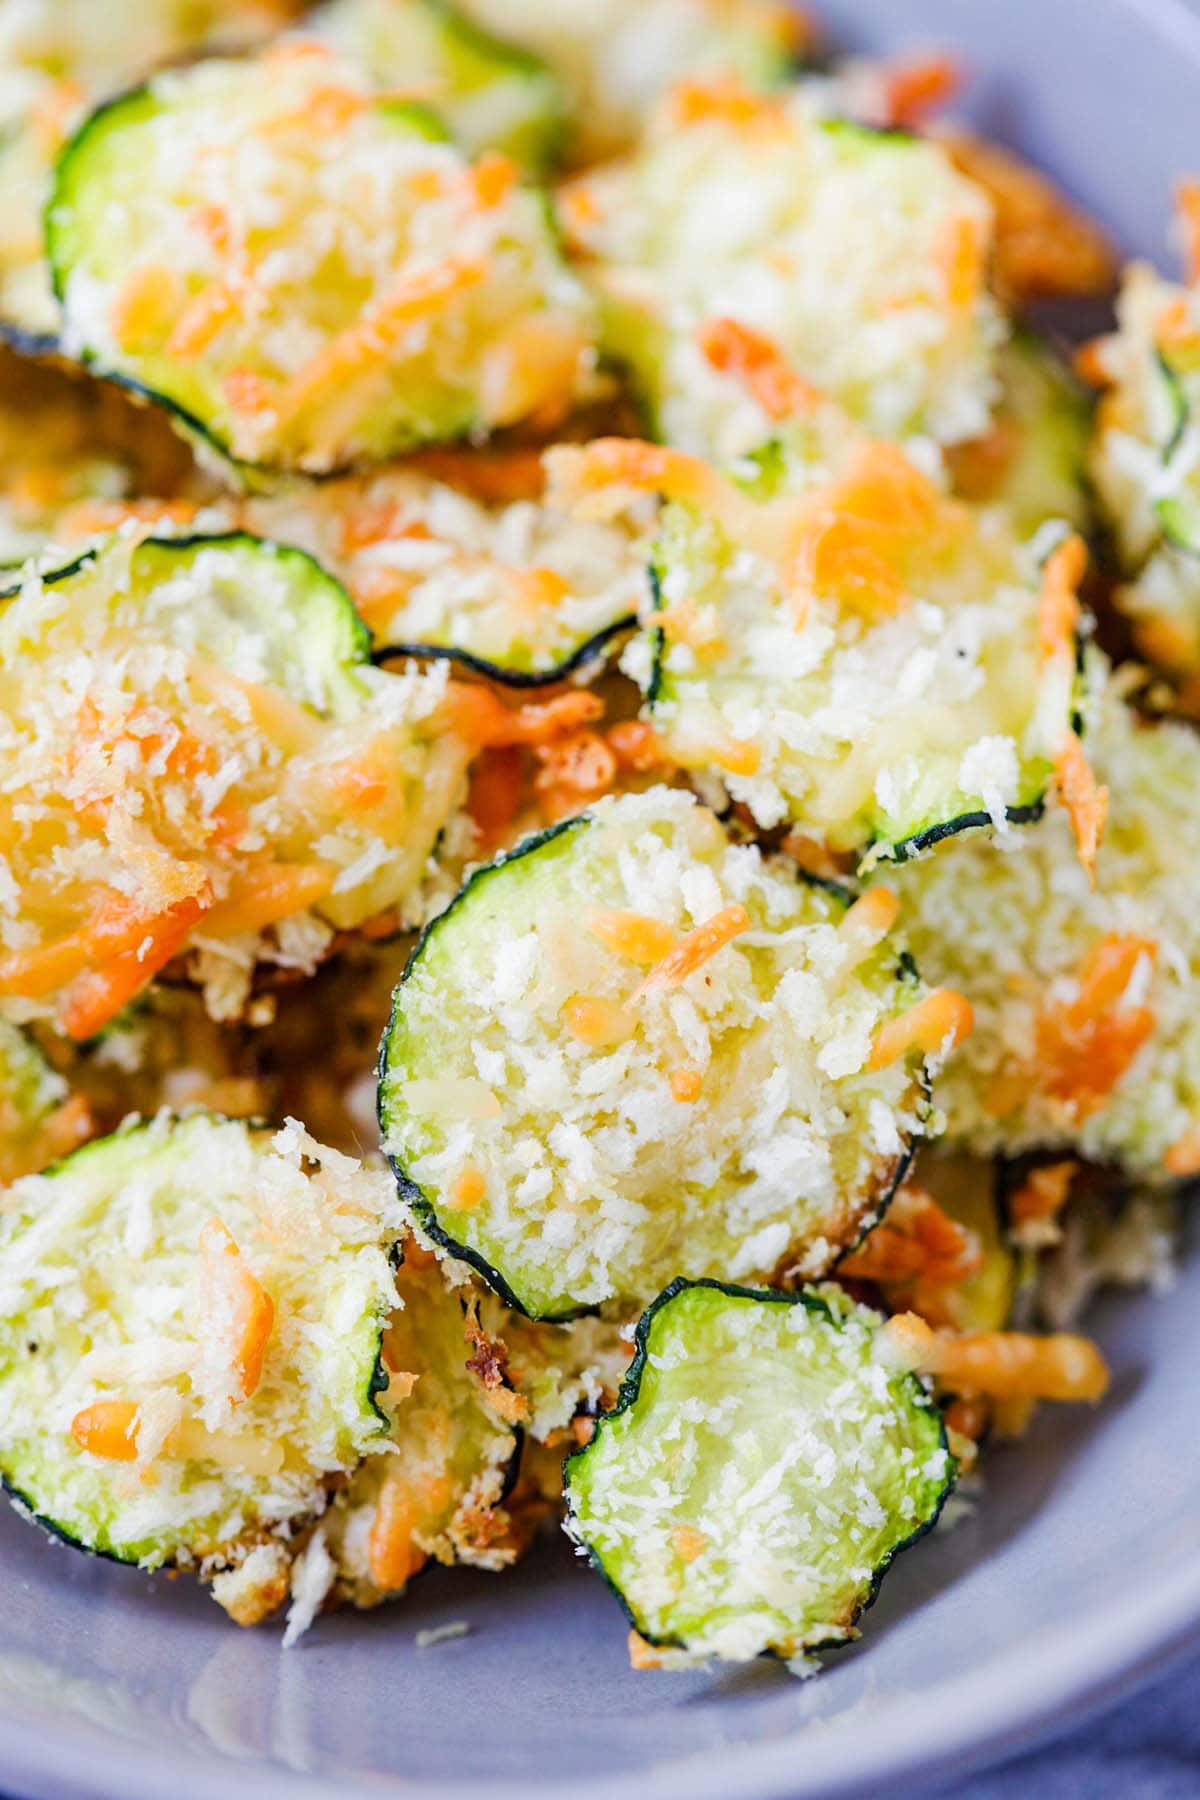 Crispy and flavorful baked zucchini chips coated with parmesan in a bowl.